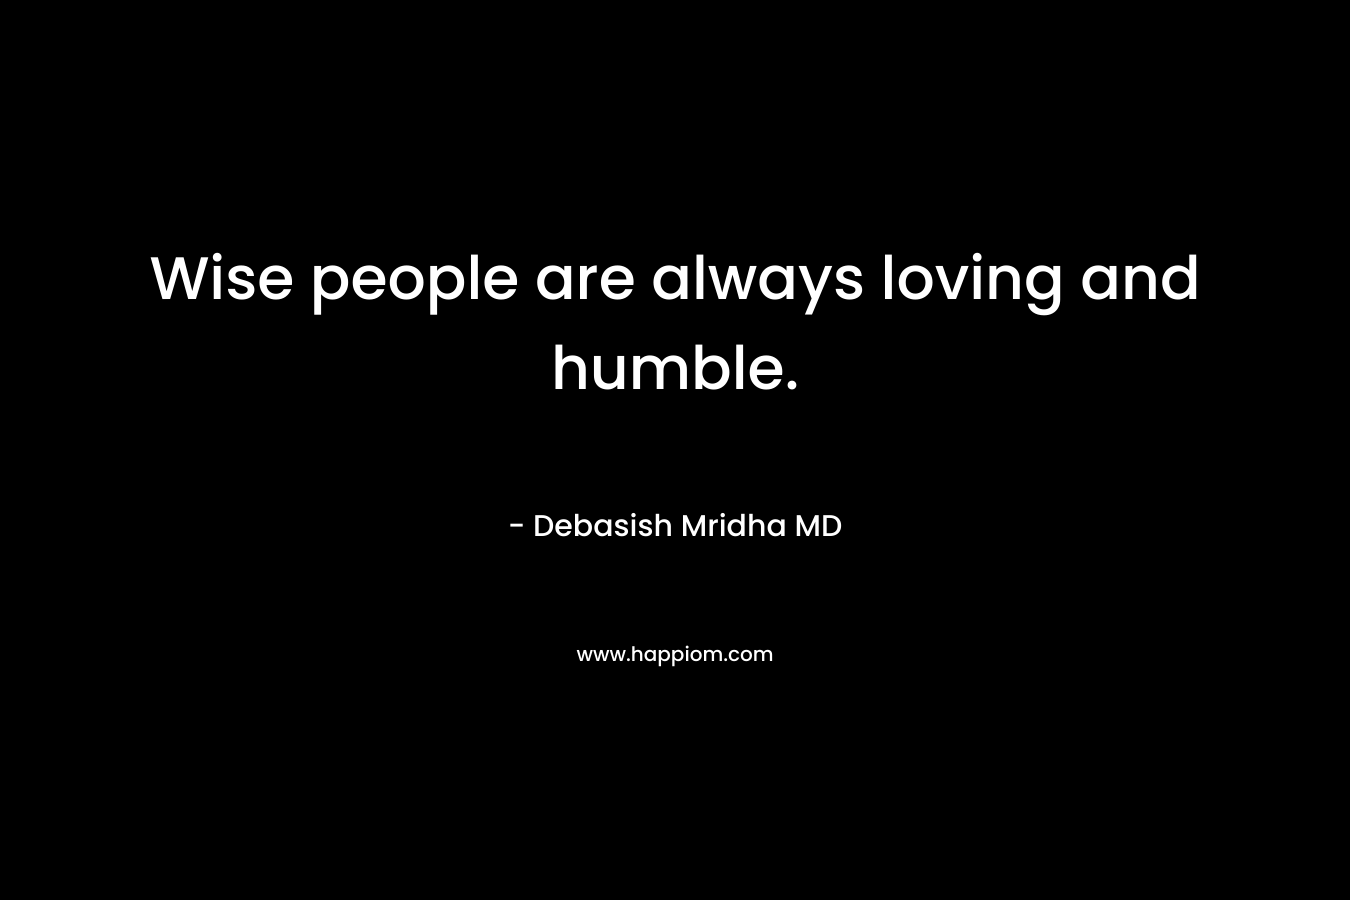 Wise people are always loving and humble.